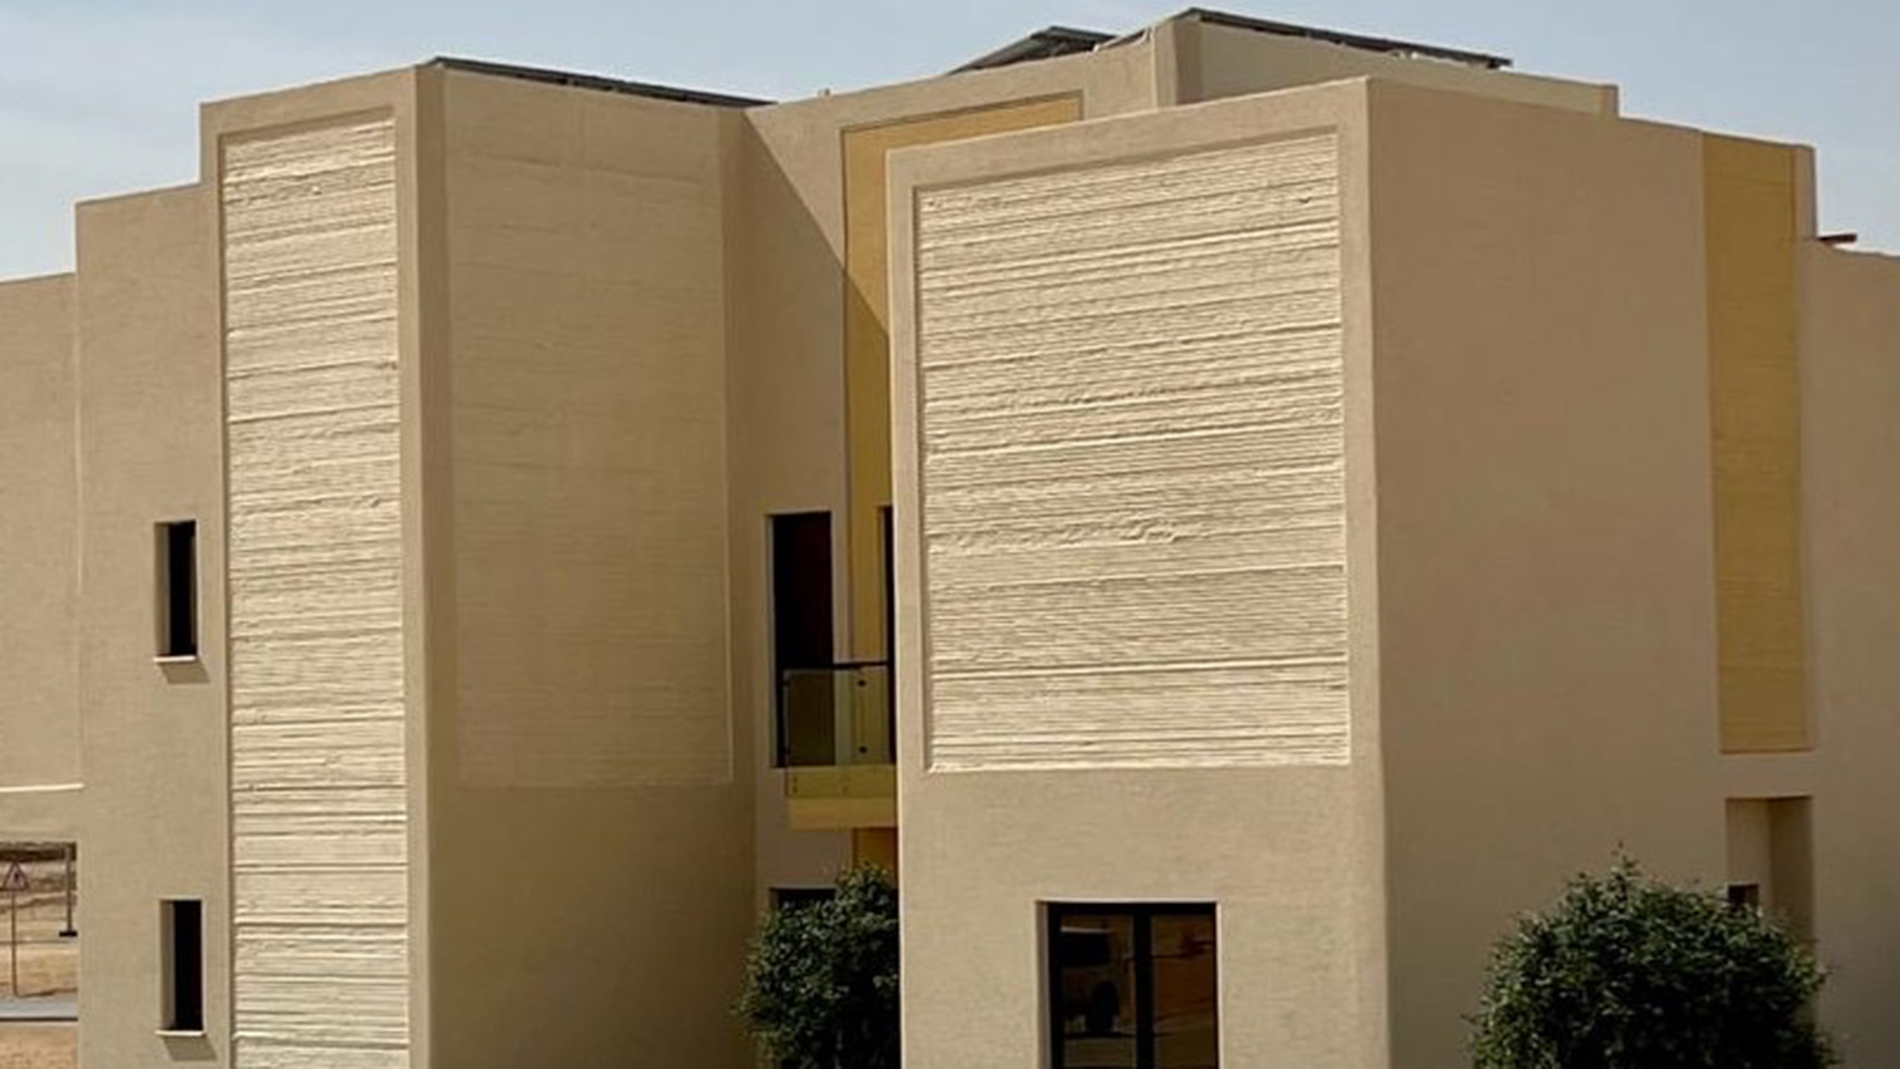 The Middle East has become an important sales market. One of the main applications is 3D Printing of buildings. Here, a 3D printed villa in Riyadh, Saudi Arabia. Image: Cobod